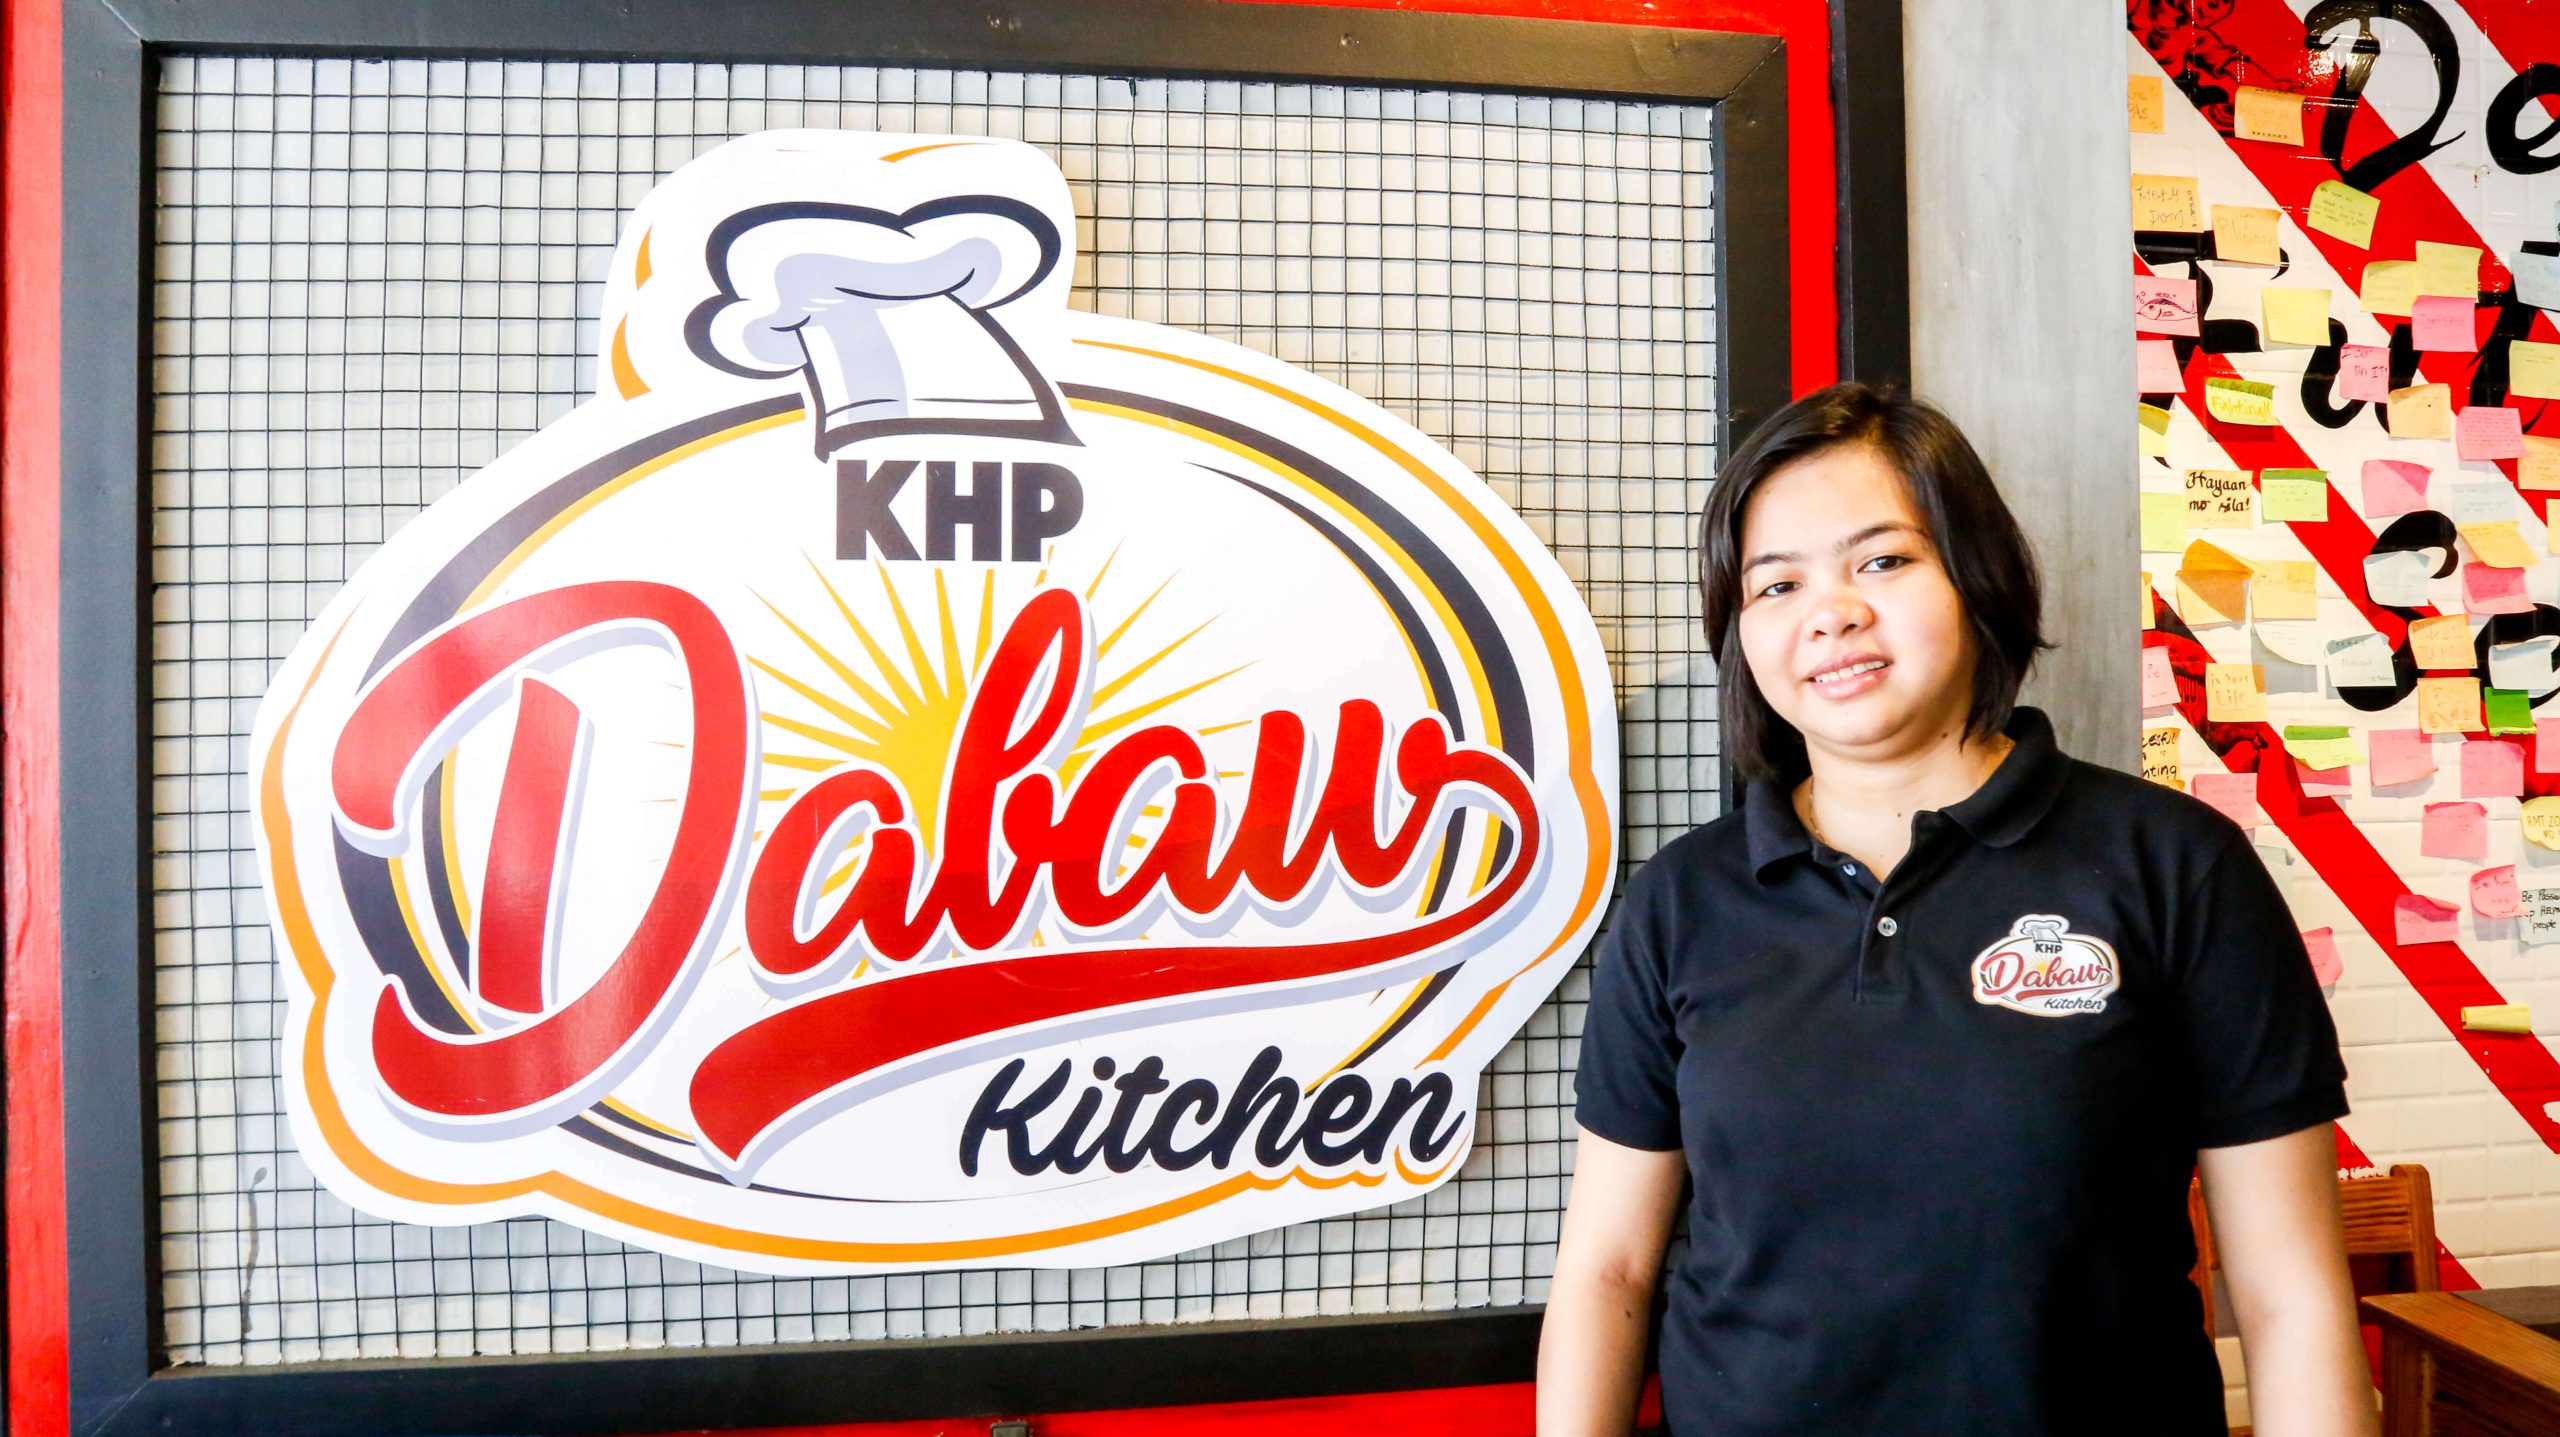 Kristine Mae Flores is the owner of Khit’s Homemade Products and KHP Dabaw Kitchen.